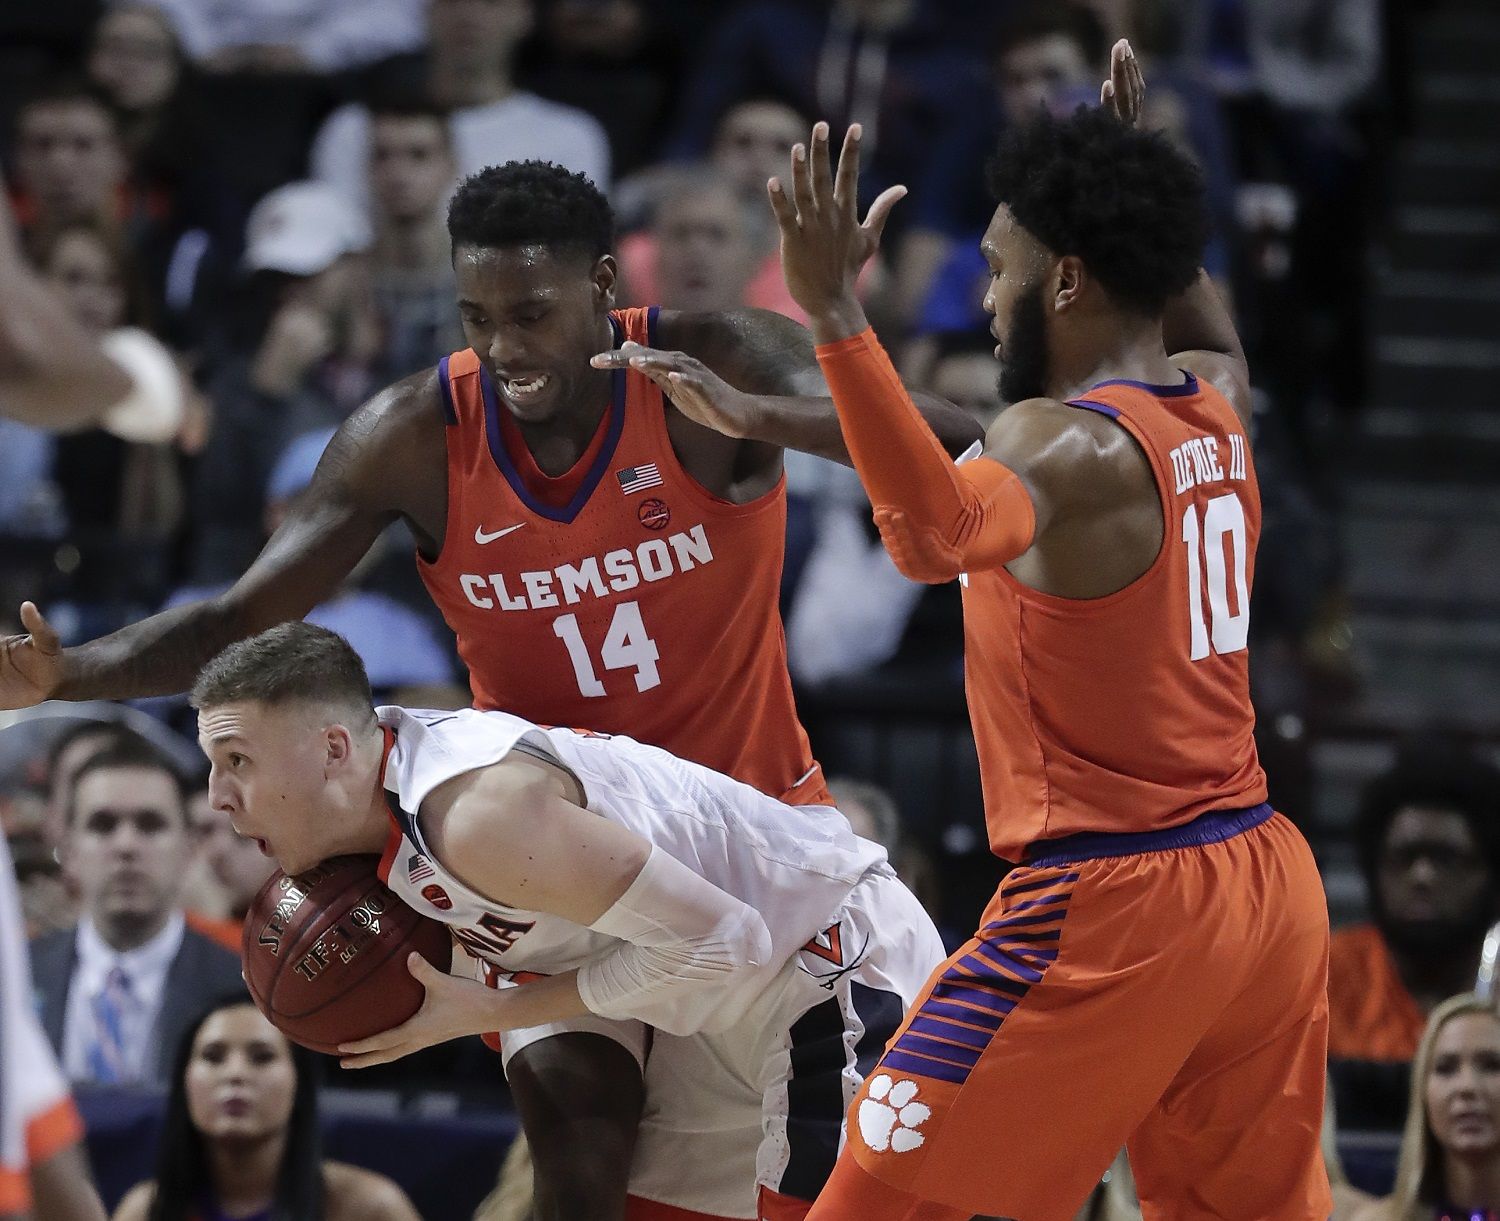 Virginia guard Kyle Guy (5) protects the ball from Clemson forward Elijah Thomas (14) and guard Gabe DeVoe (10) during the second half of an NCAA college basketball game in the Atlantic Coast Conference men's tournament semifinals Friday, March 9, 2018, in New York. (AP Photo/Julie Jacobson)